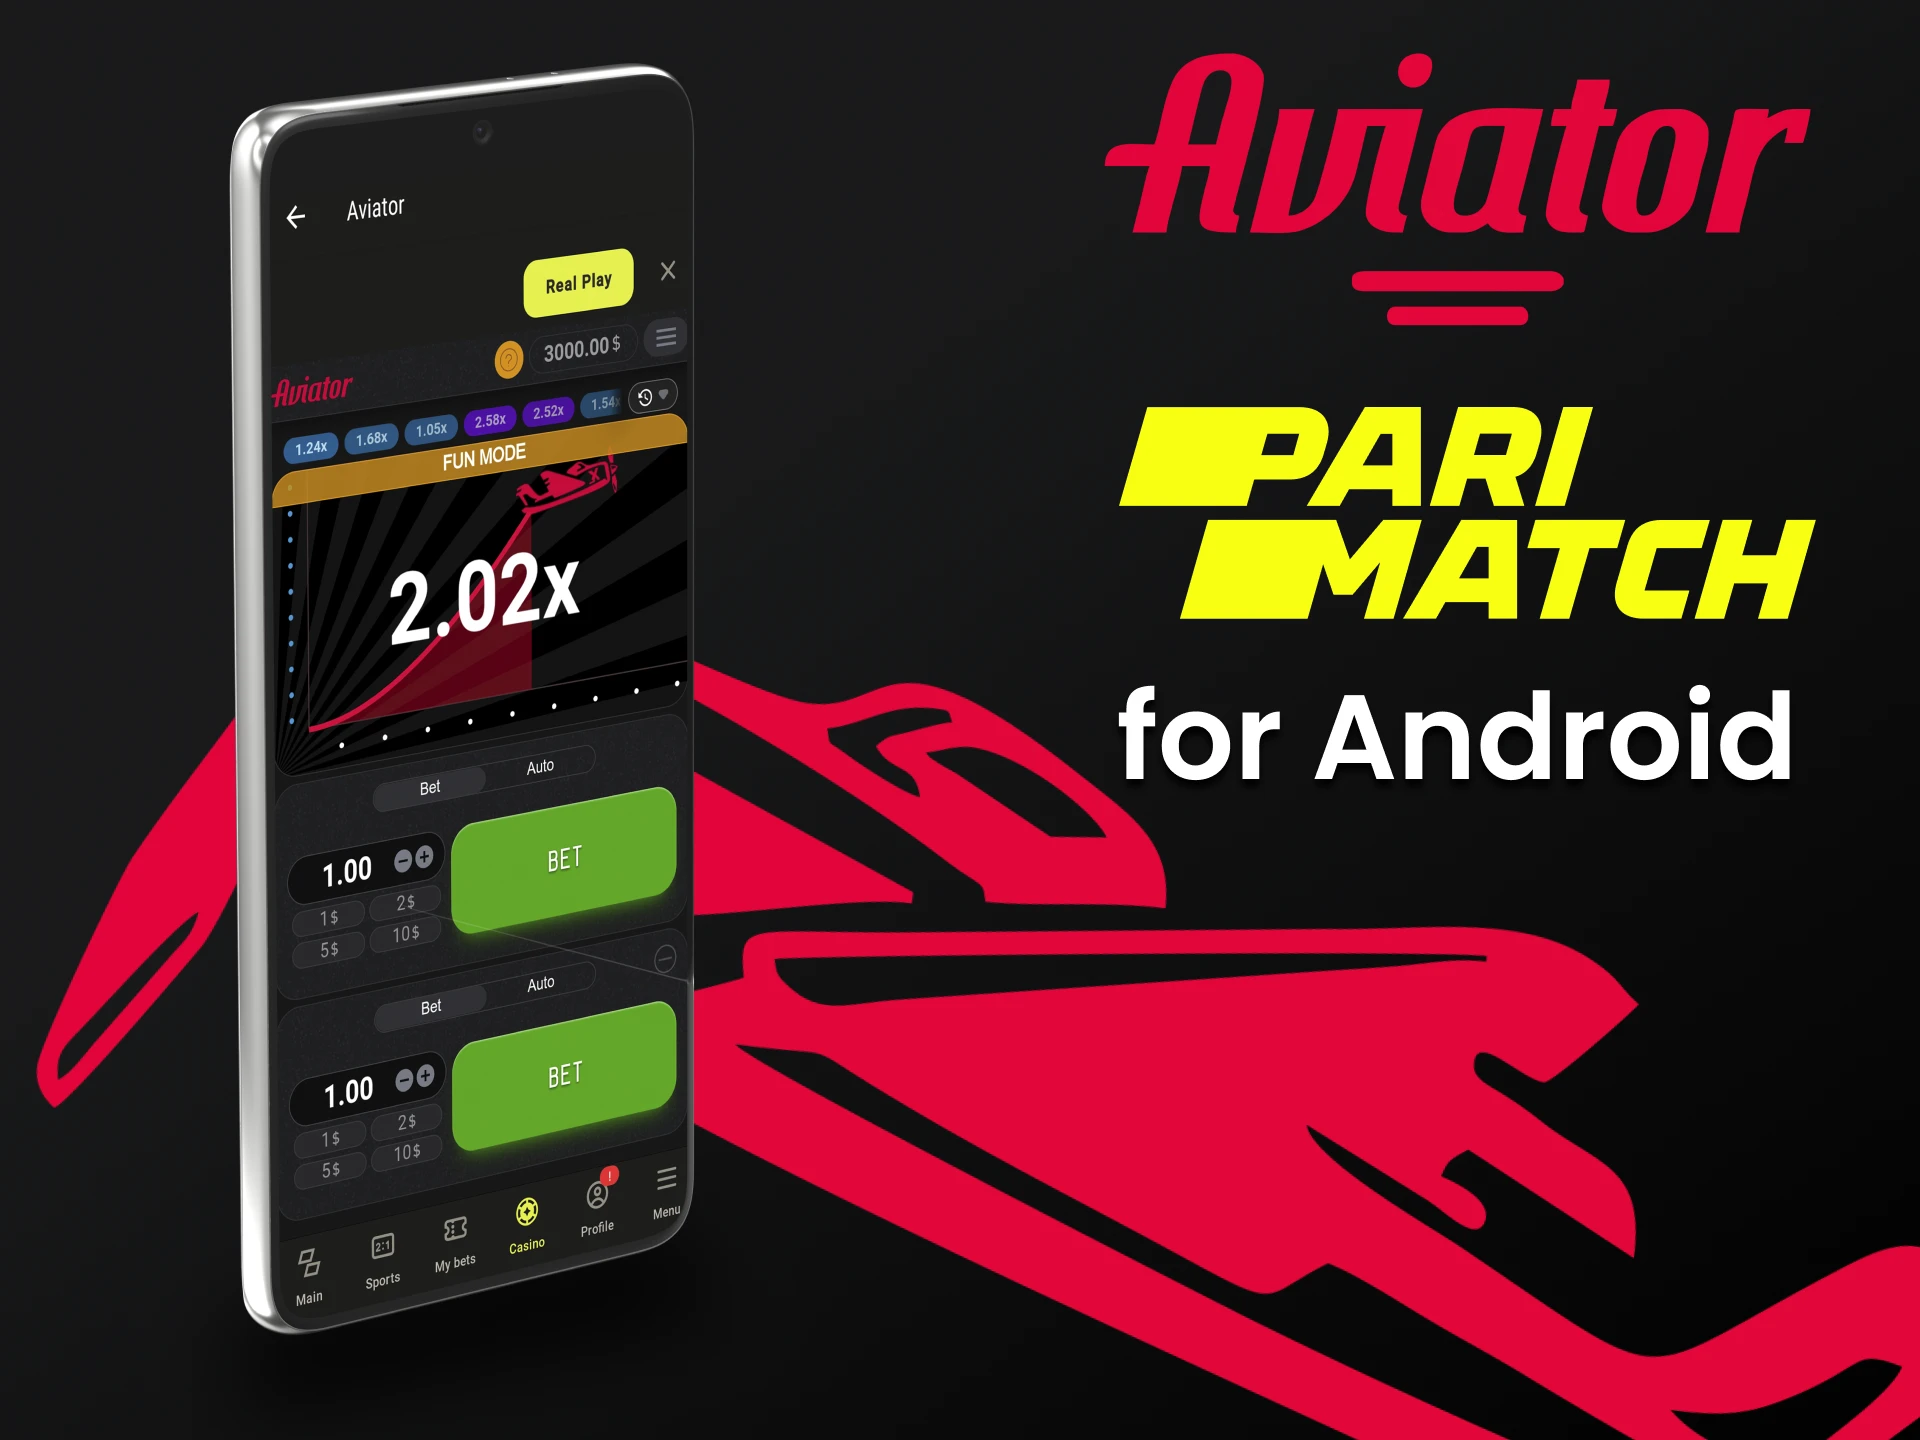 Play Aviator by Parimatch on your android device.